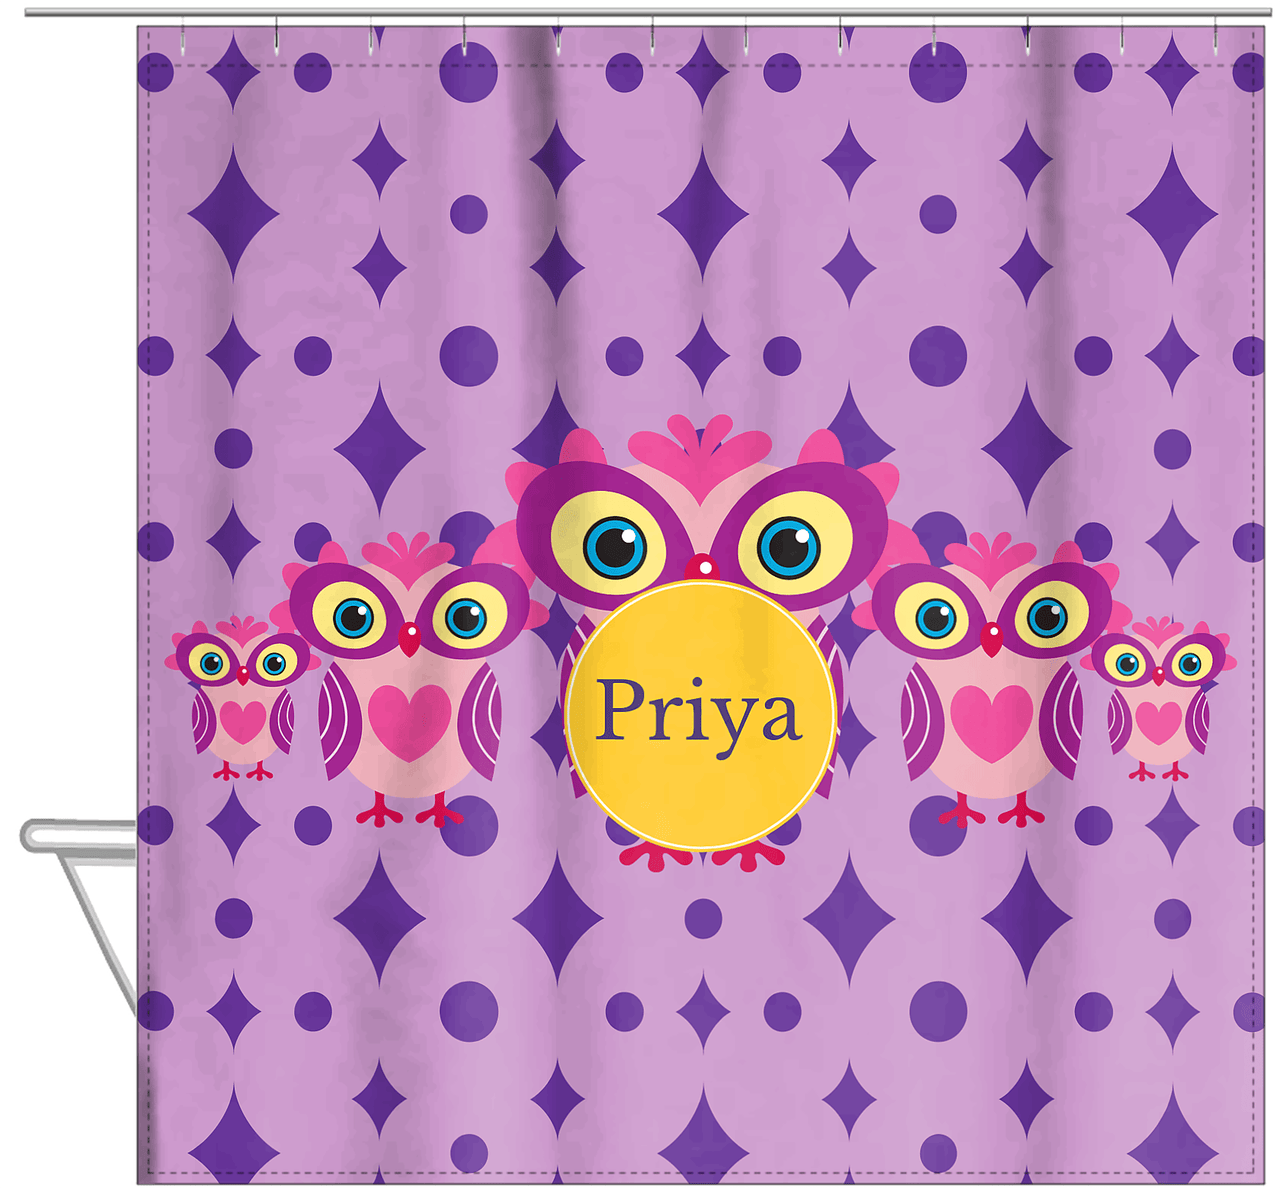 Personalized Owl Shower Curtain IV - Owl 07 - Purple Background - Hanging View